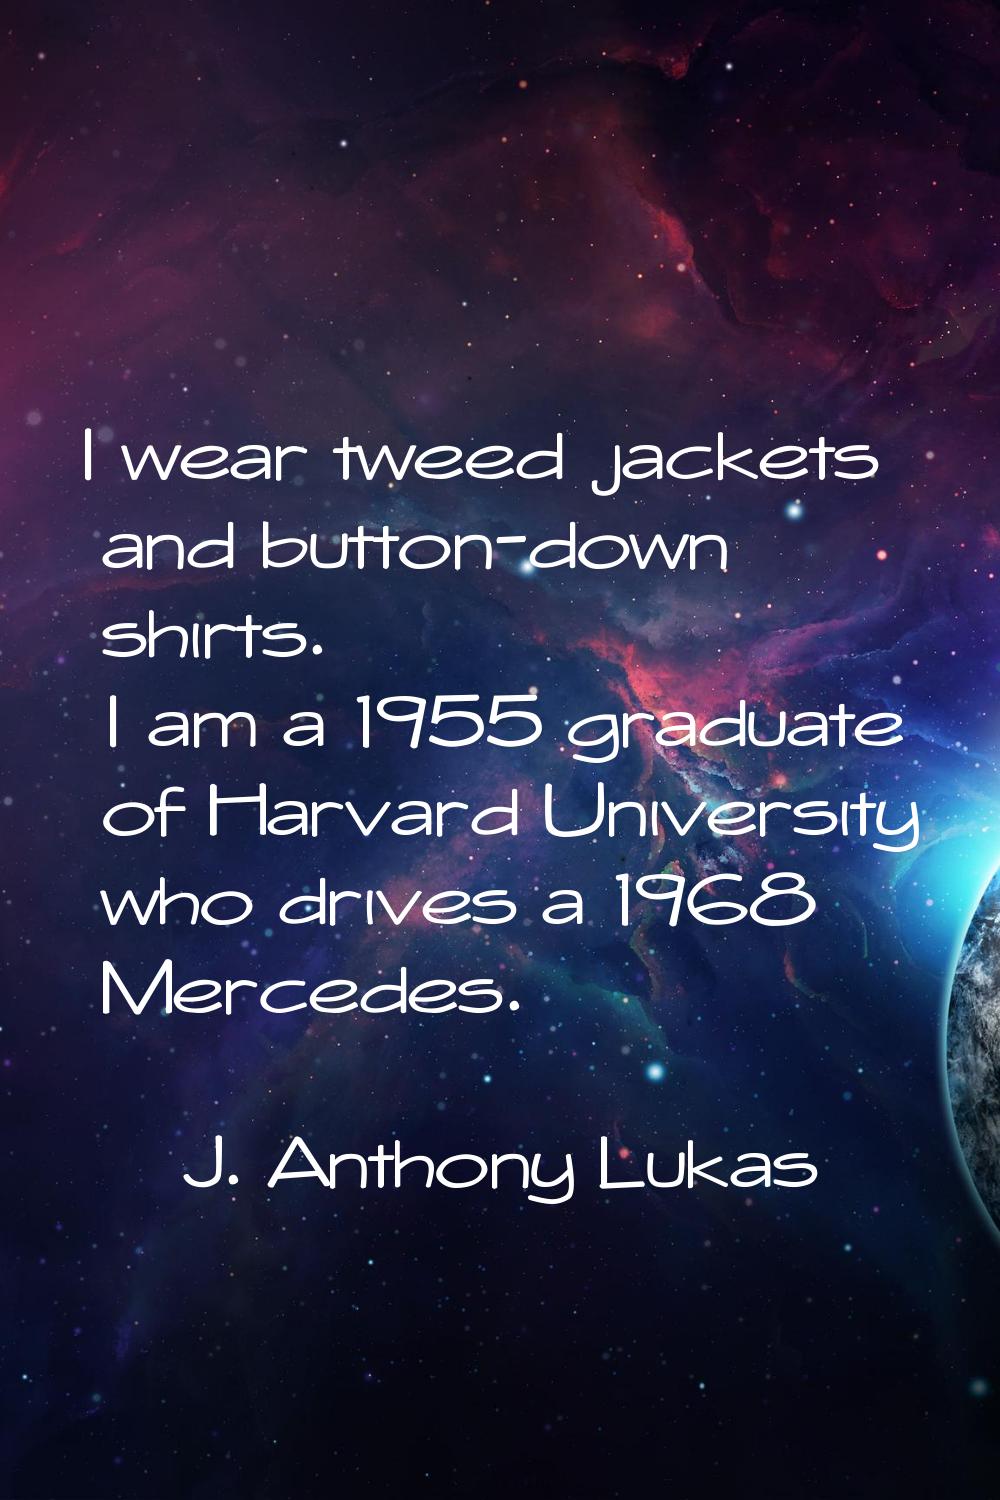 I wear tweed jackets and button-down shirts. I am a 1955 graduate of Harvard University who drives 